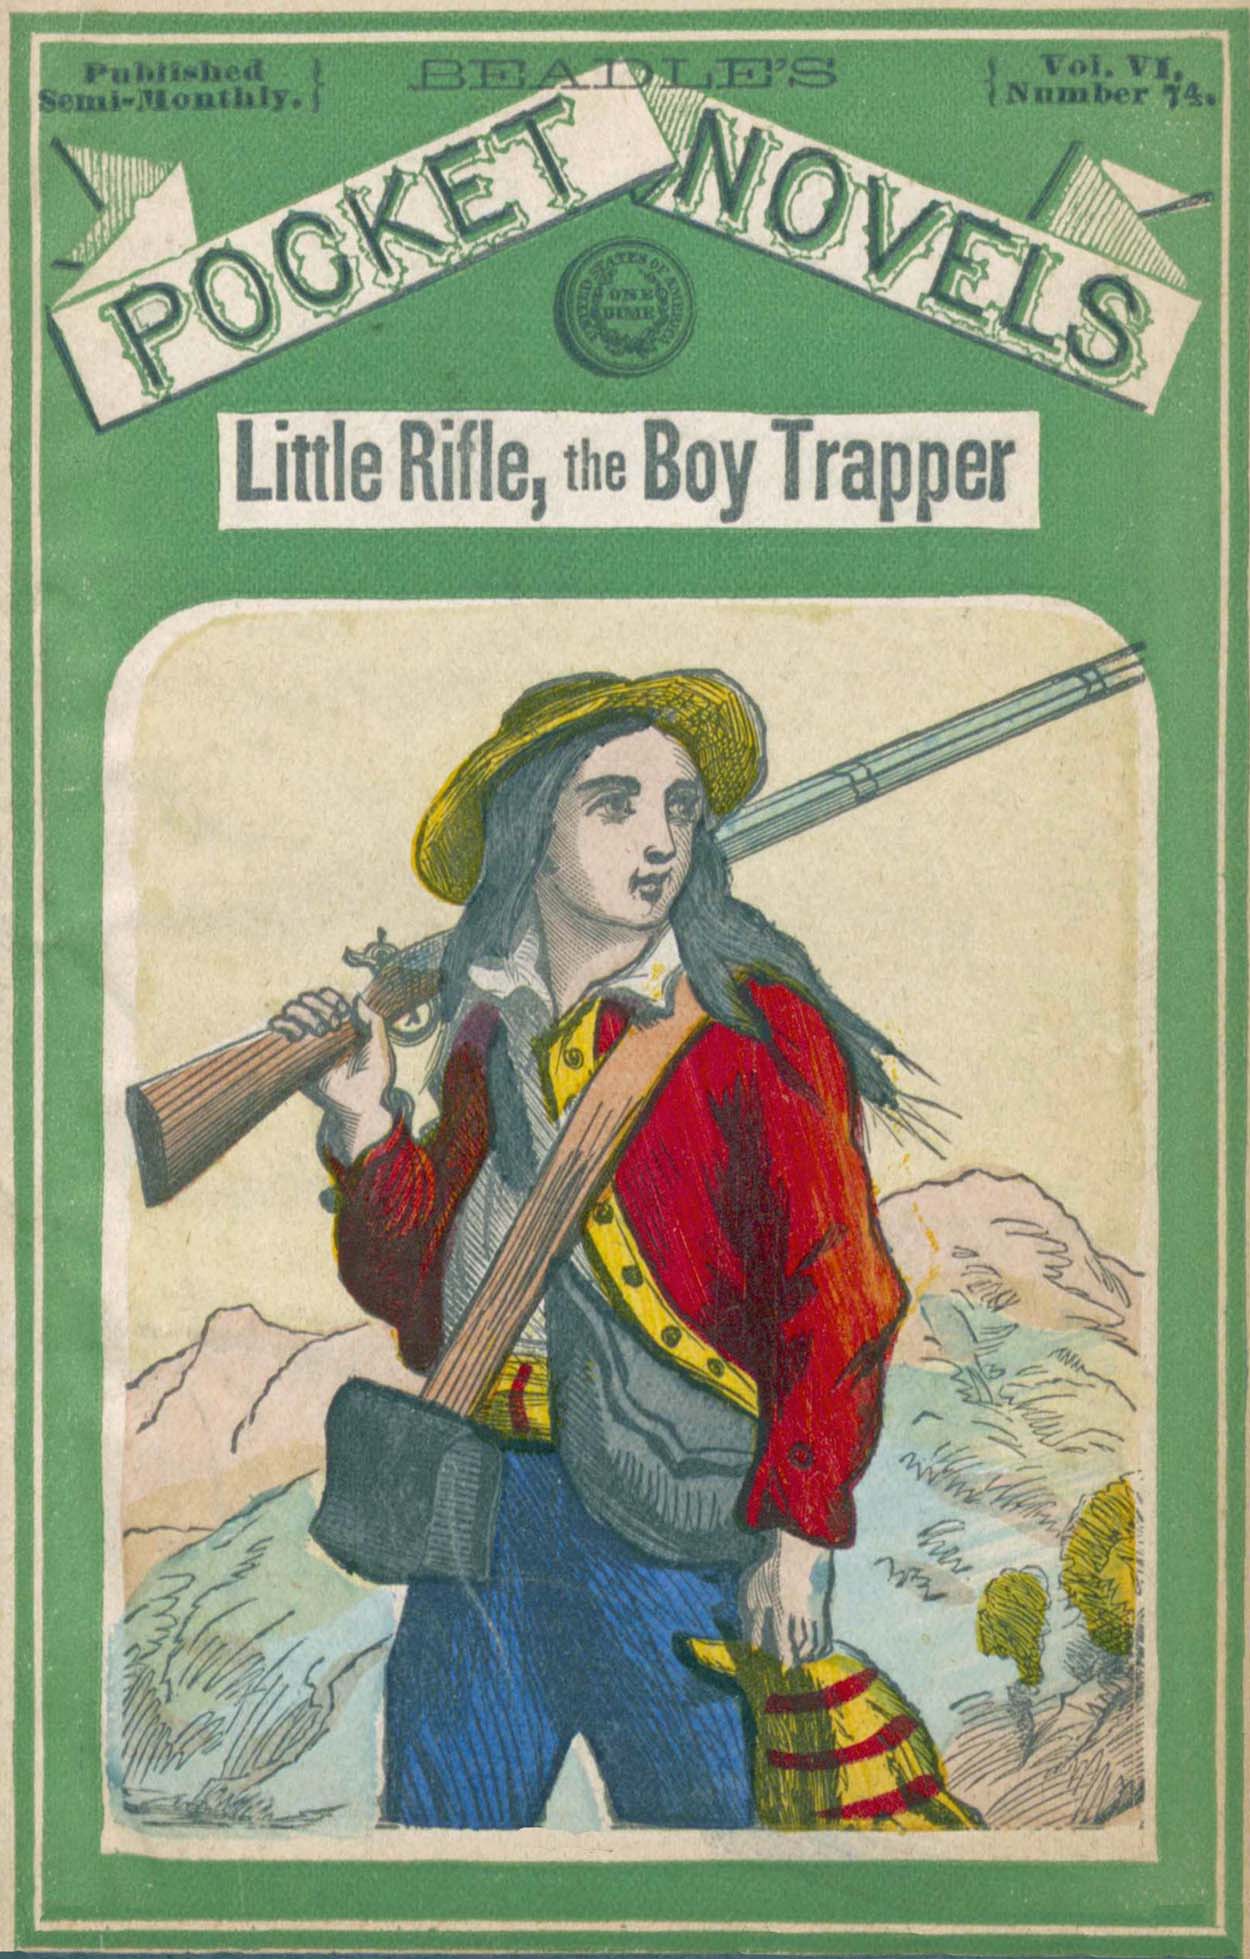 Little Rifle; or, The Young Fur Hunters